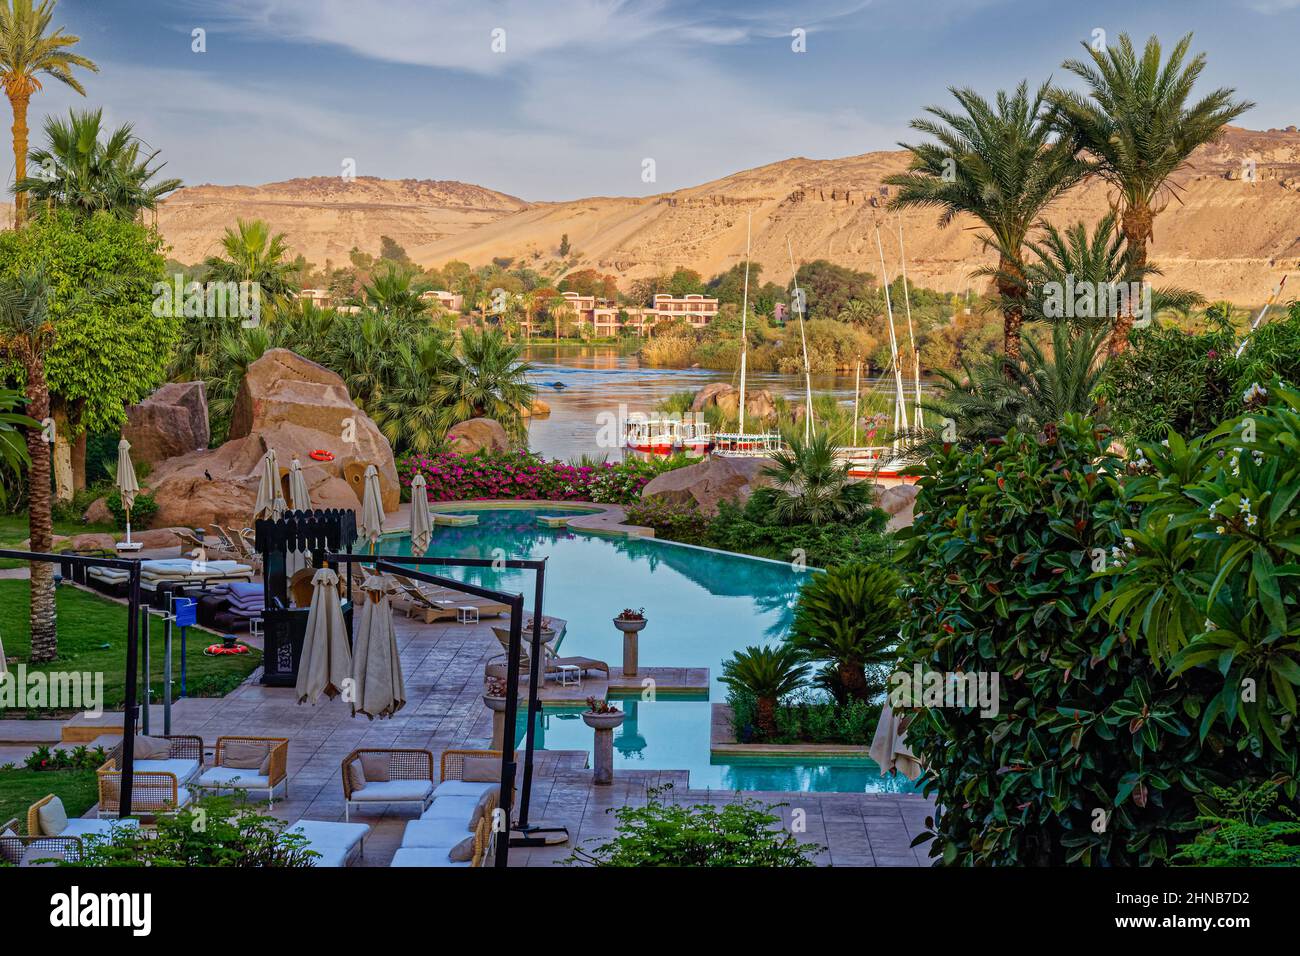 Swimming pool overlooking the River Nile at the Sofitel Legend Old Cataract Hotel in Aswan, Upper Egypt Stock Photo